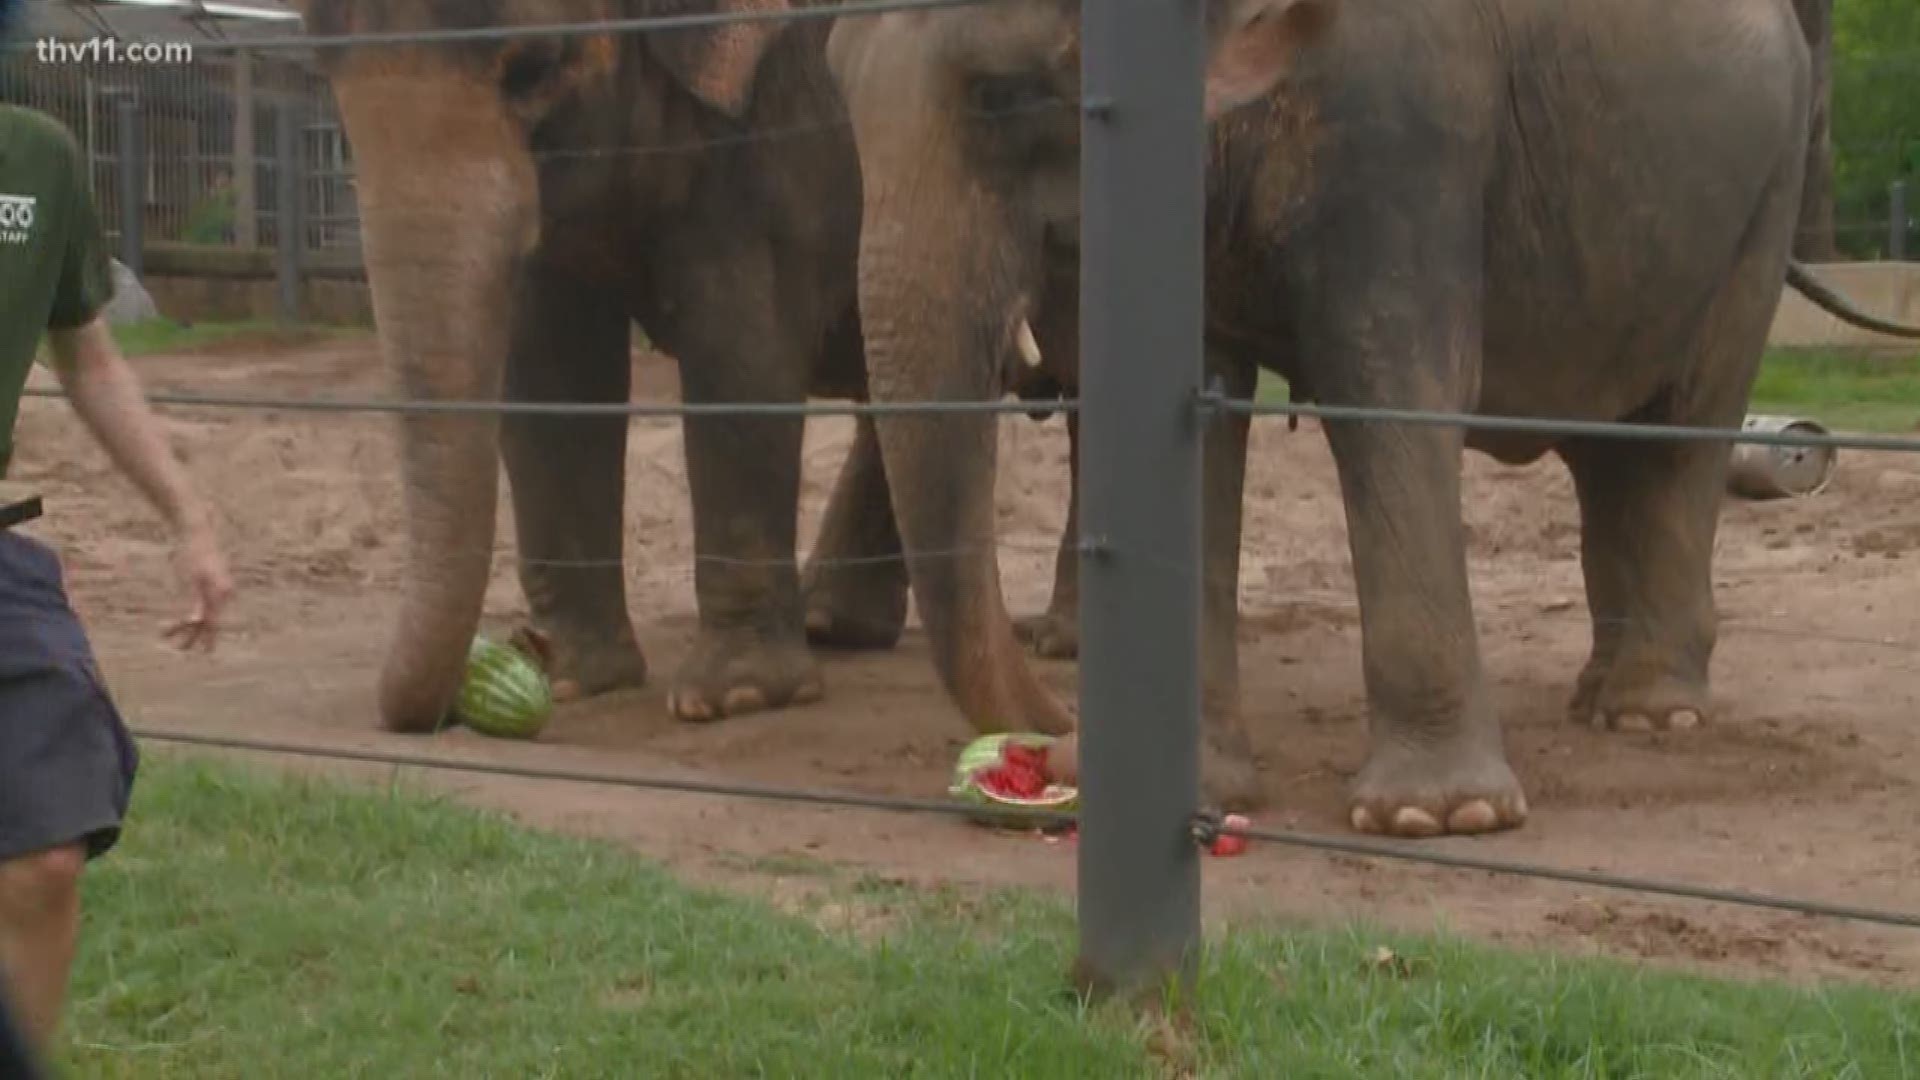 The Little Rock Fire Department tried to beat the elephants at the Little Rock Zoo in a watermelon eating contest.